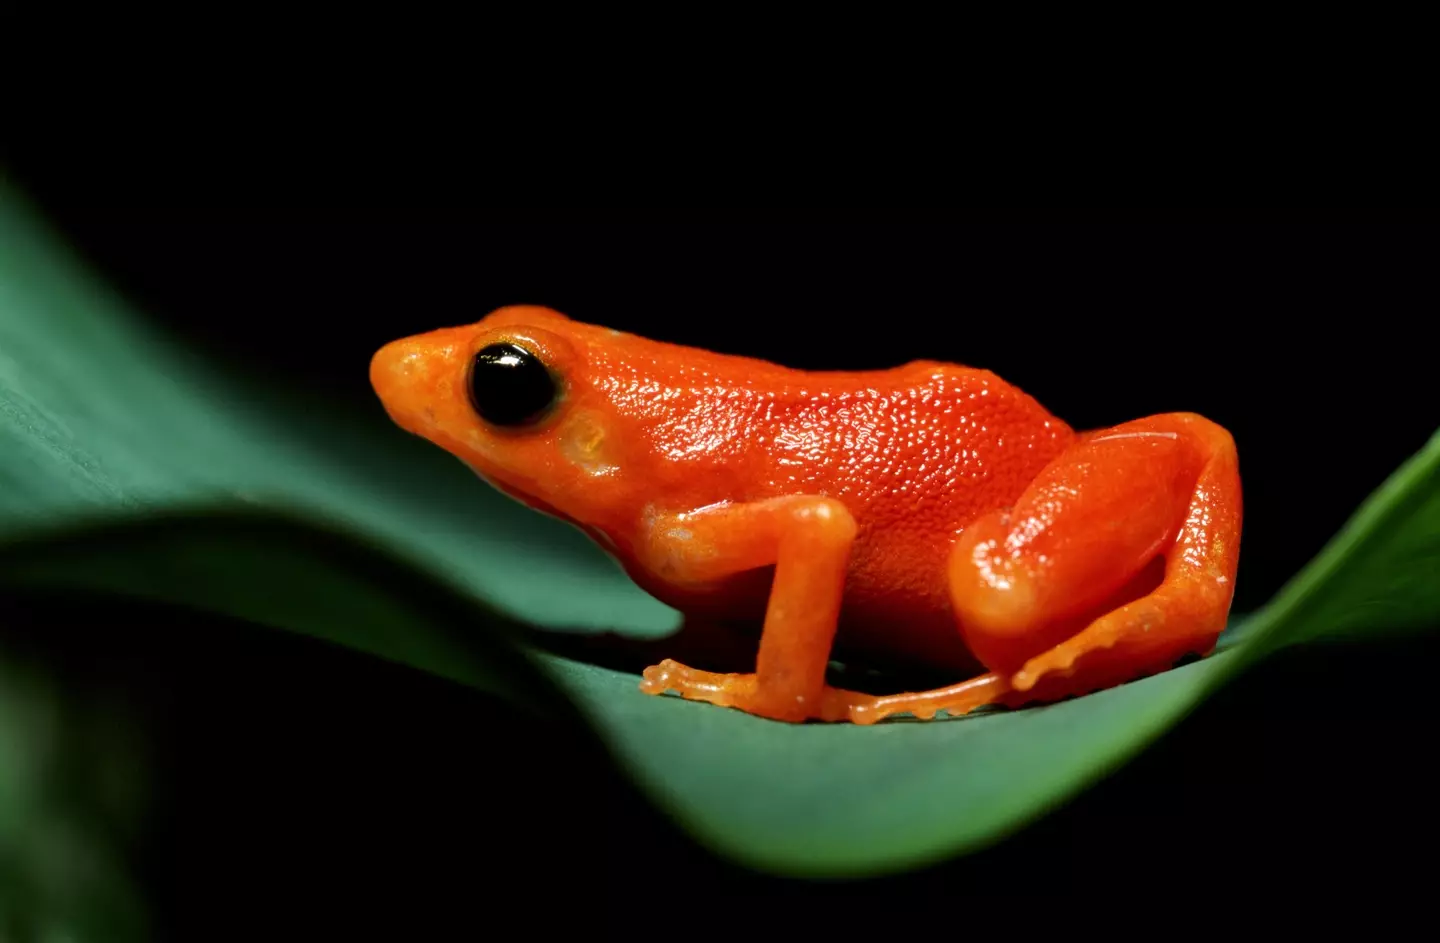 Ginger pigmentation has been found in a 10 million-year-old frog fossil.